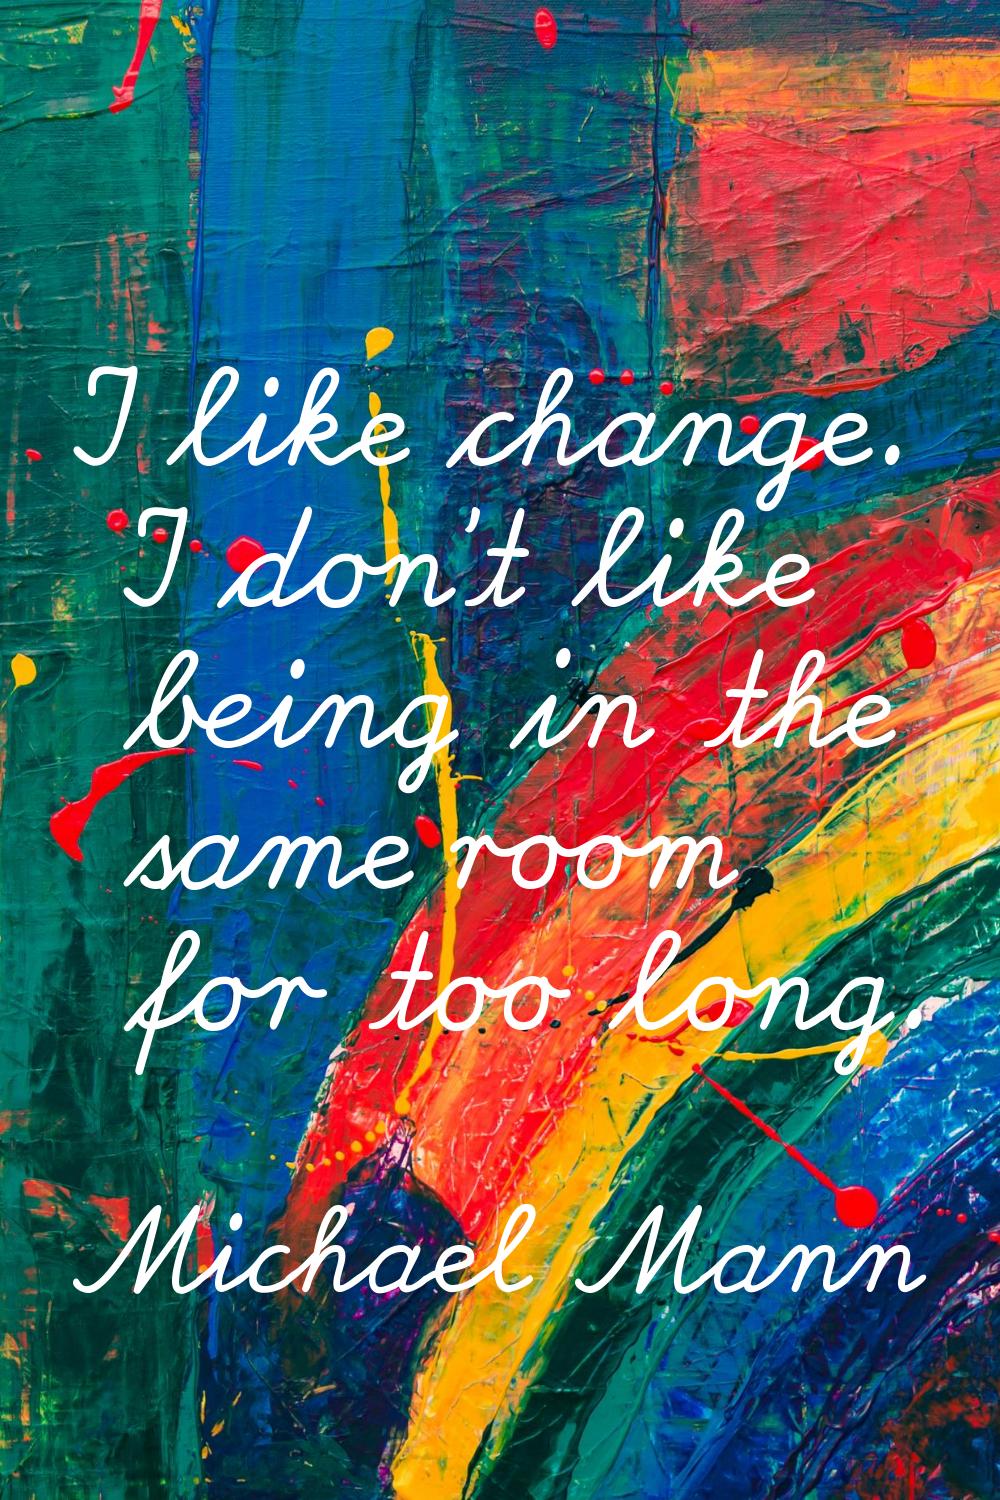 I like change. I don't like being in the same room for too long.